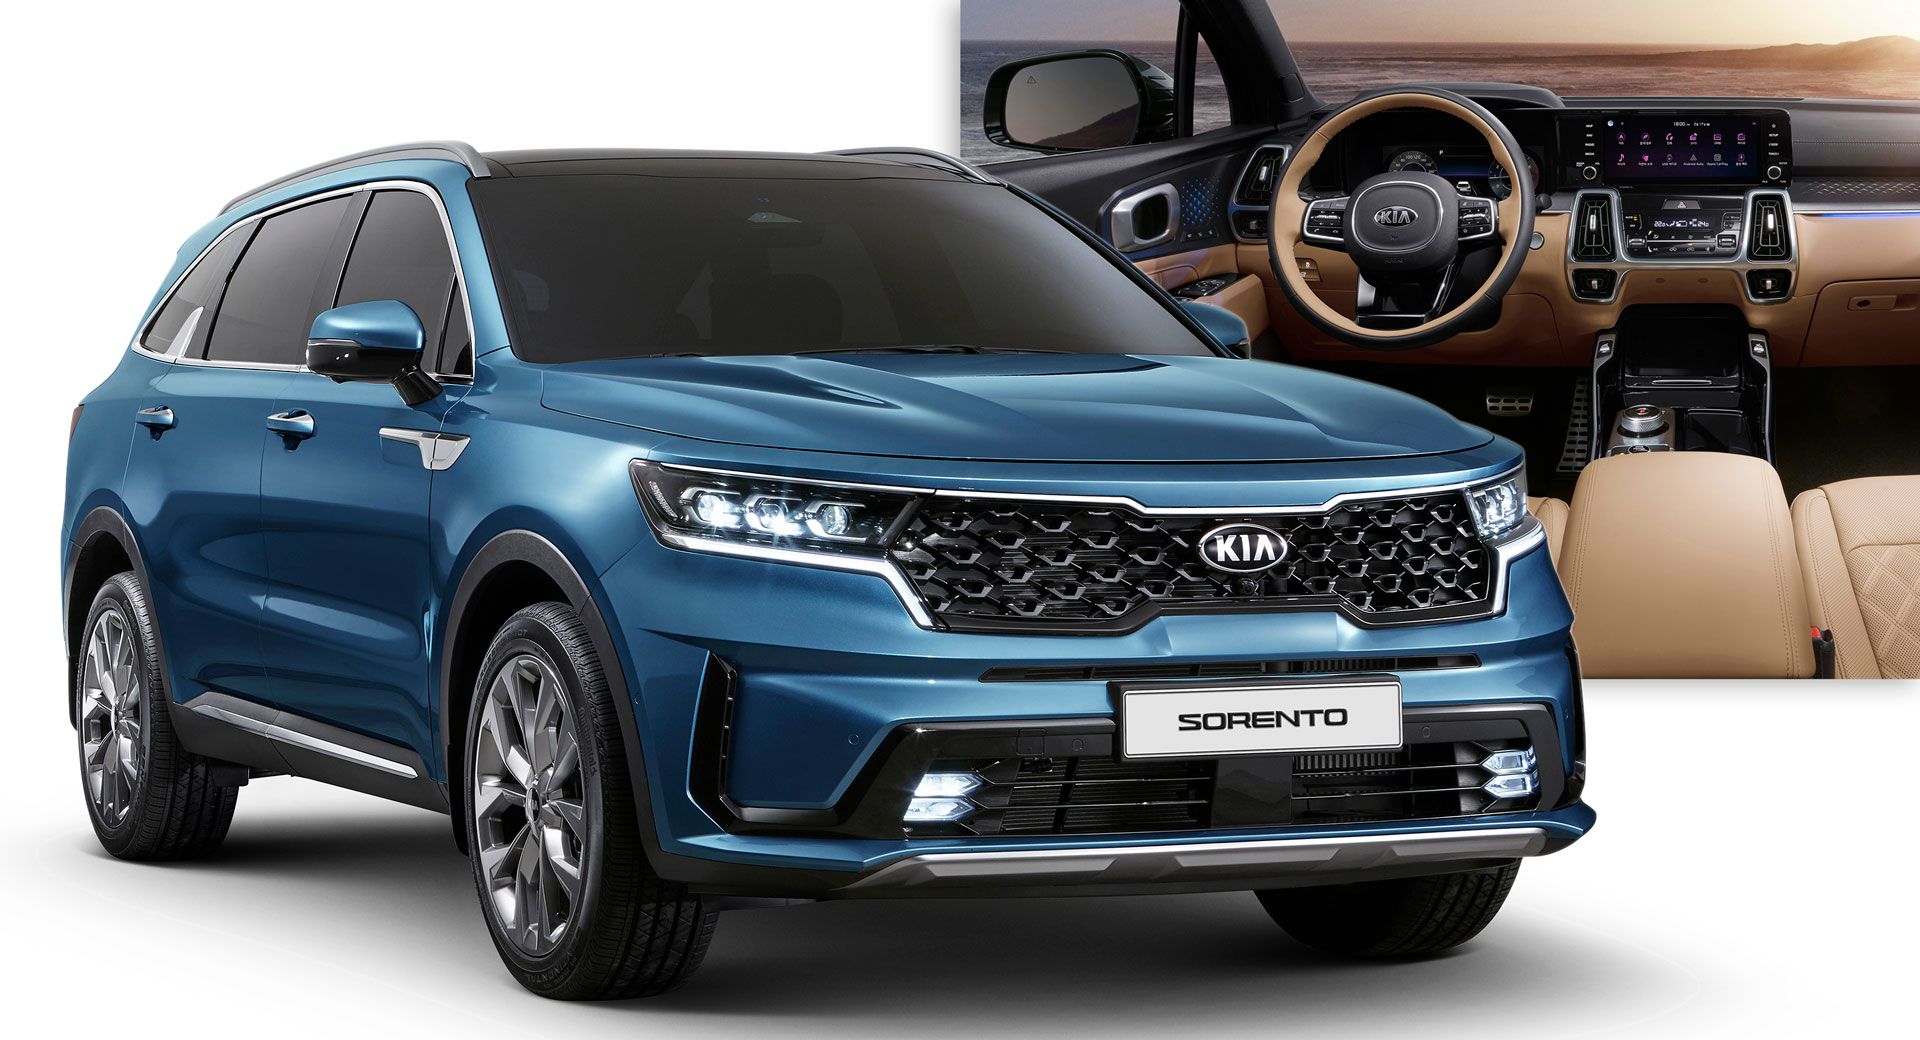 Kia Sorento: Here Are The First Official Image And Details